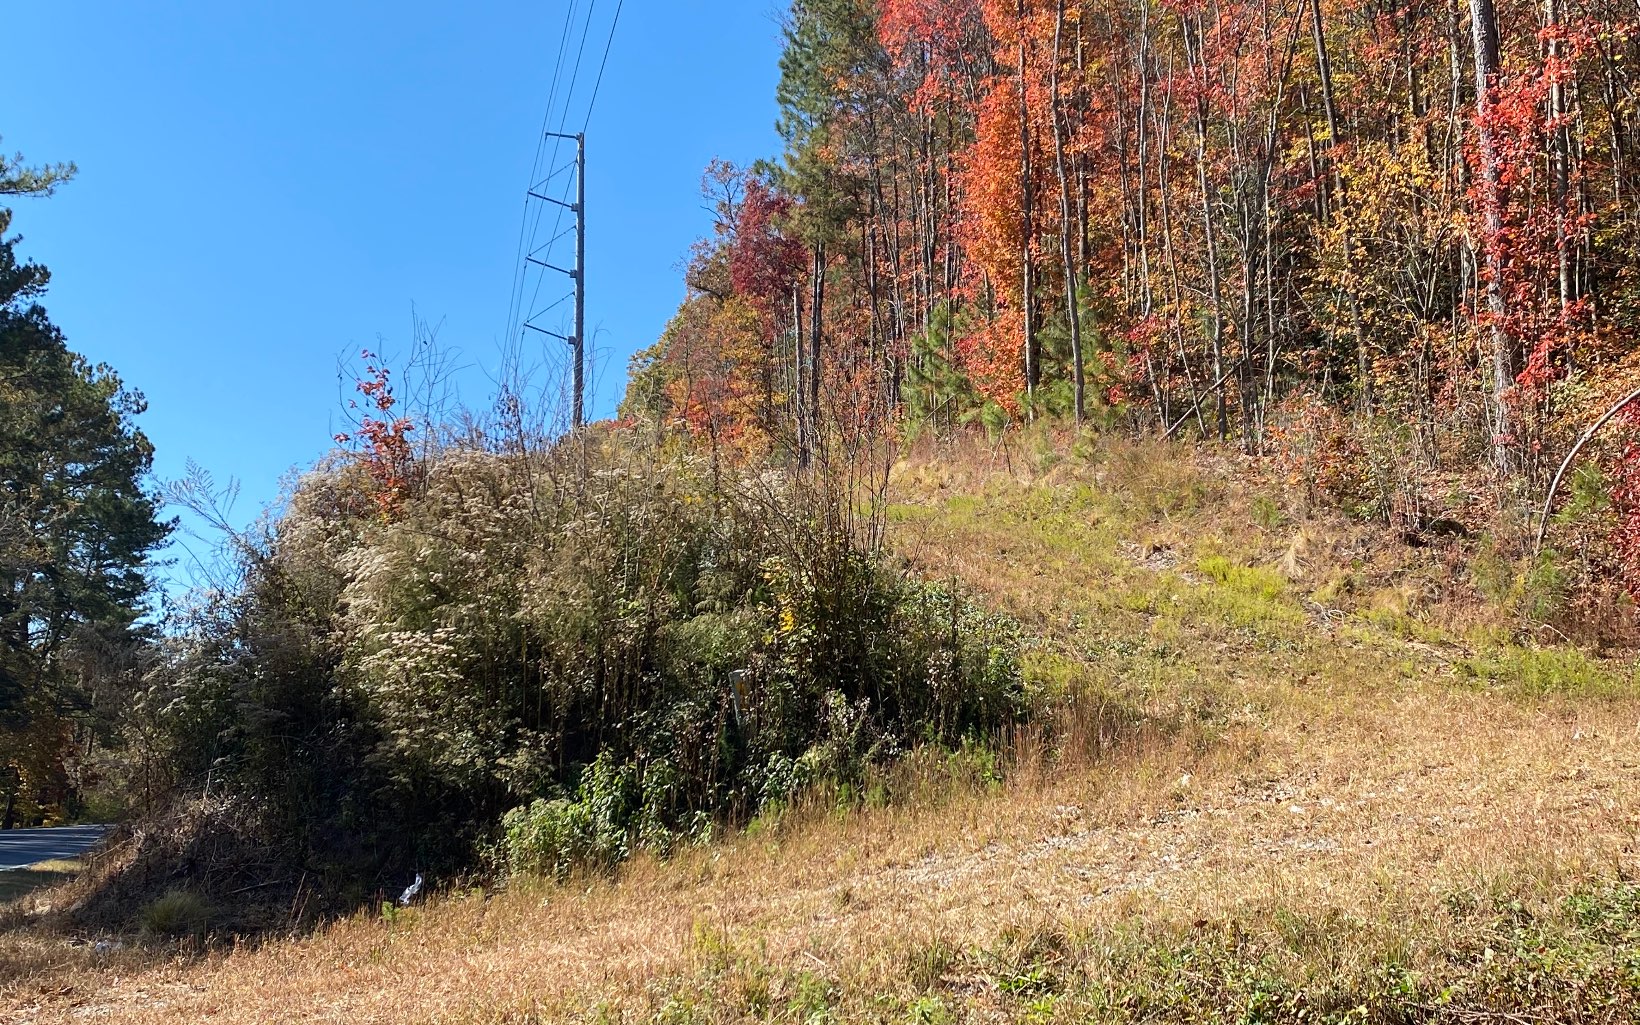 13.28 Acres Located on State Highway. Beautiful Gentle Acreage that features Paved Highway Frontage, Electric To Property Line, Large Hardwoods and Two Access Roads in place. Only Minutes To Downtown Ellijay, Shopping and Restaurants.